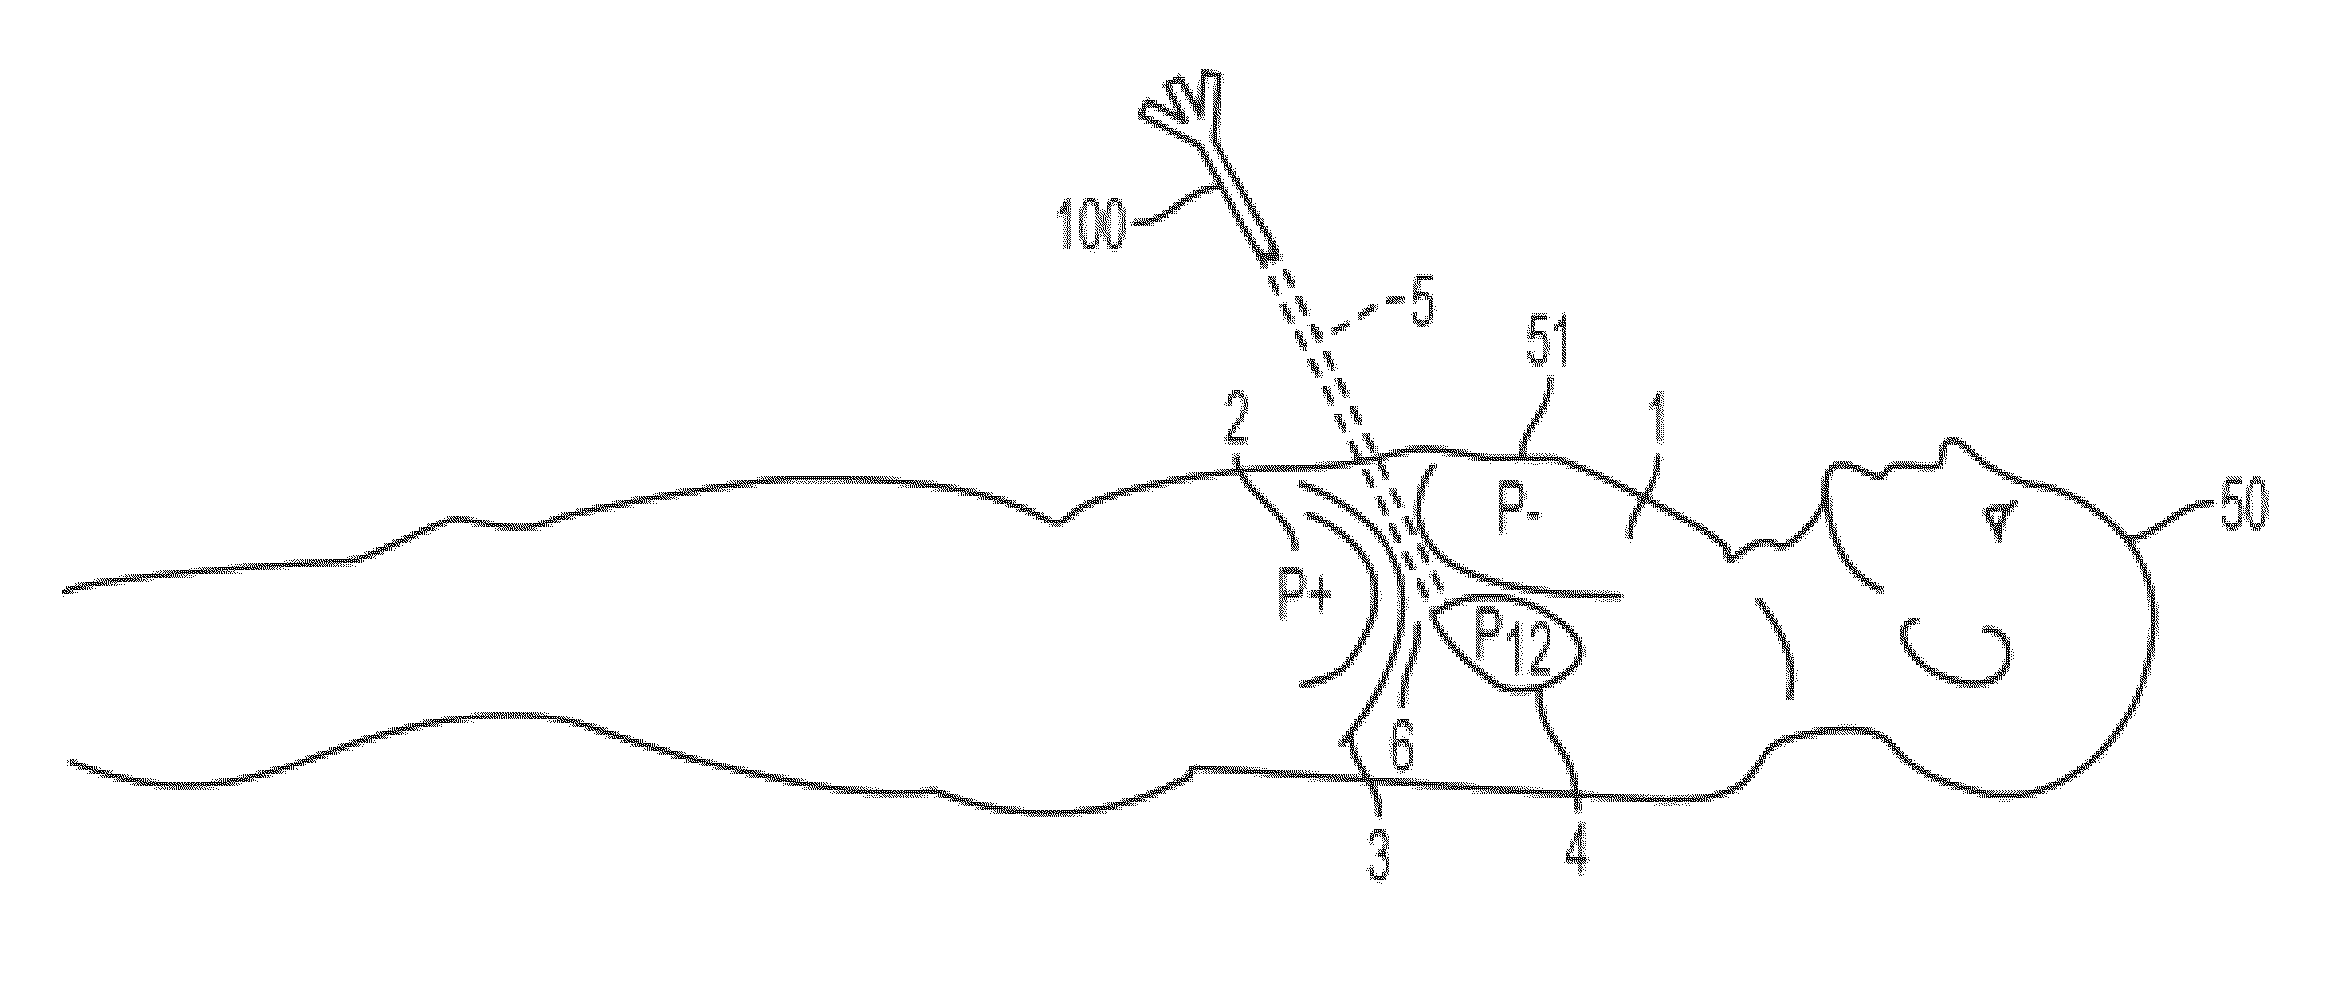 Access needle with direct visualization and related methods